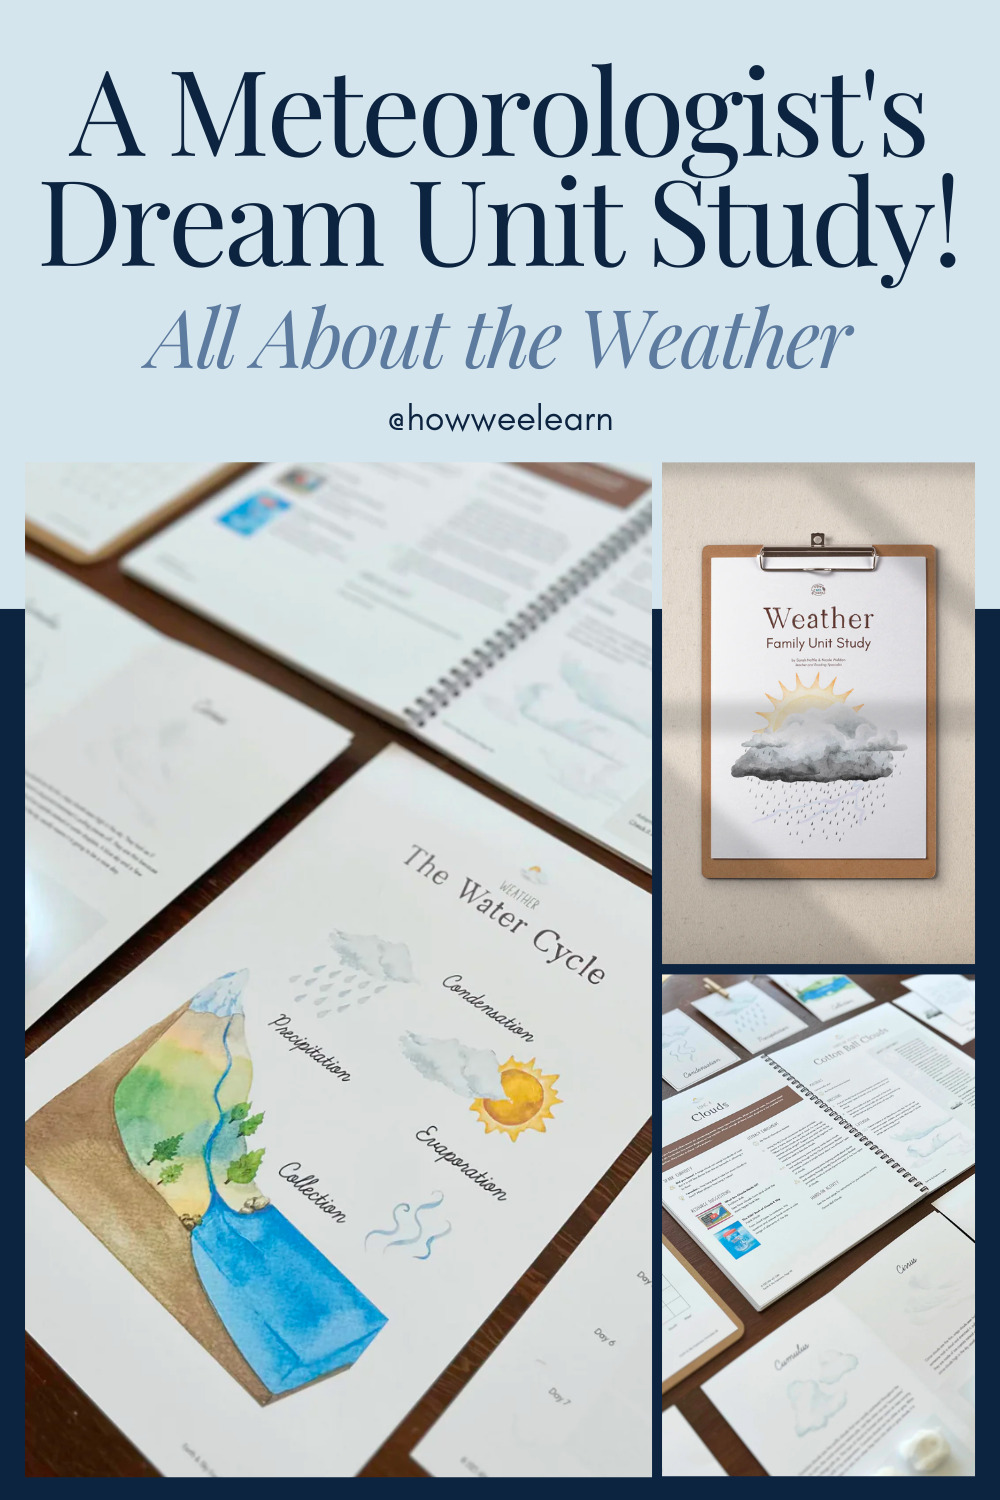 A Meteorologist's Dream Unit Study: All About the Weather!